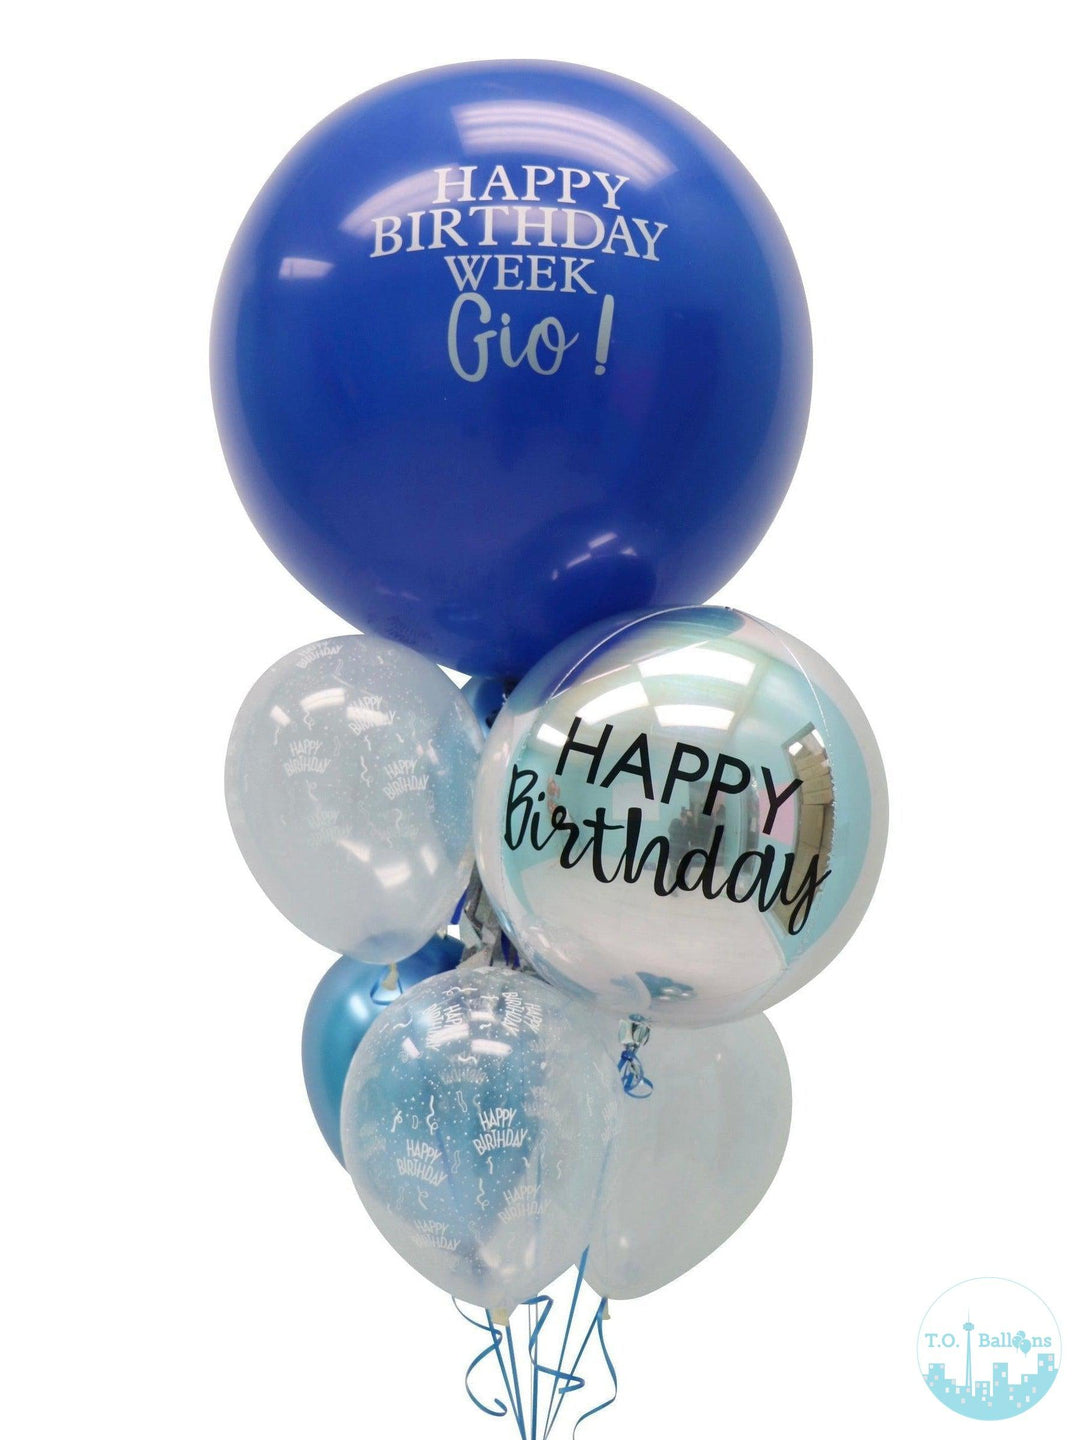 3ft Personalized Balloon Bouquet Balloons T.O. Balloons 